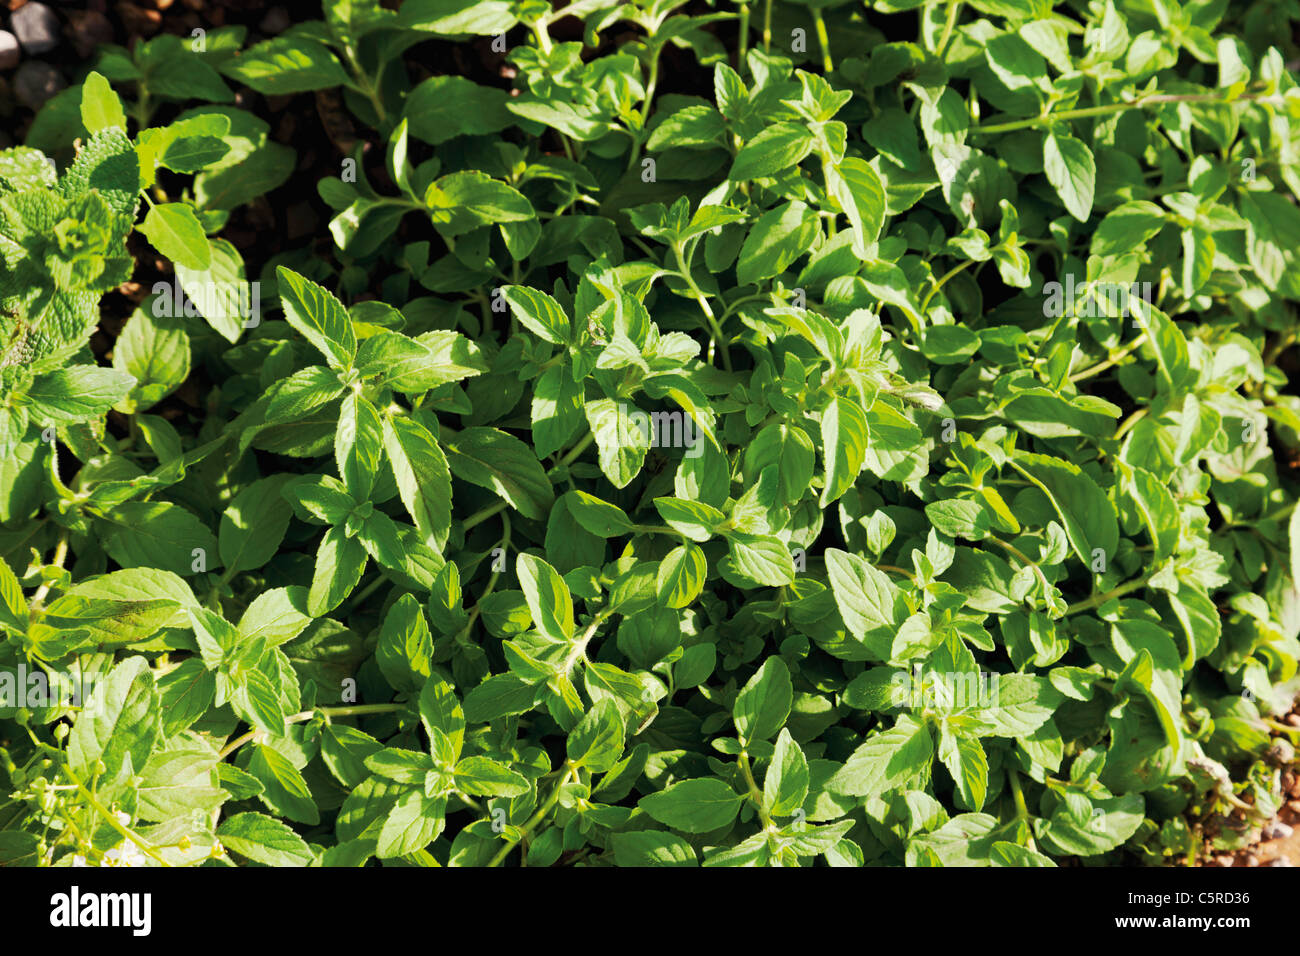 Germany, Close up of Mentha arvensis plant Stock Photo